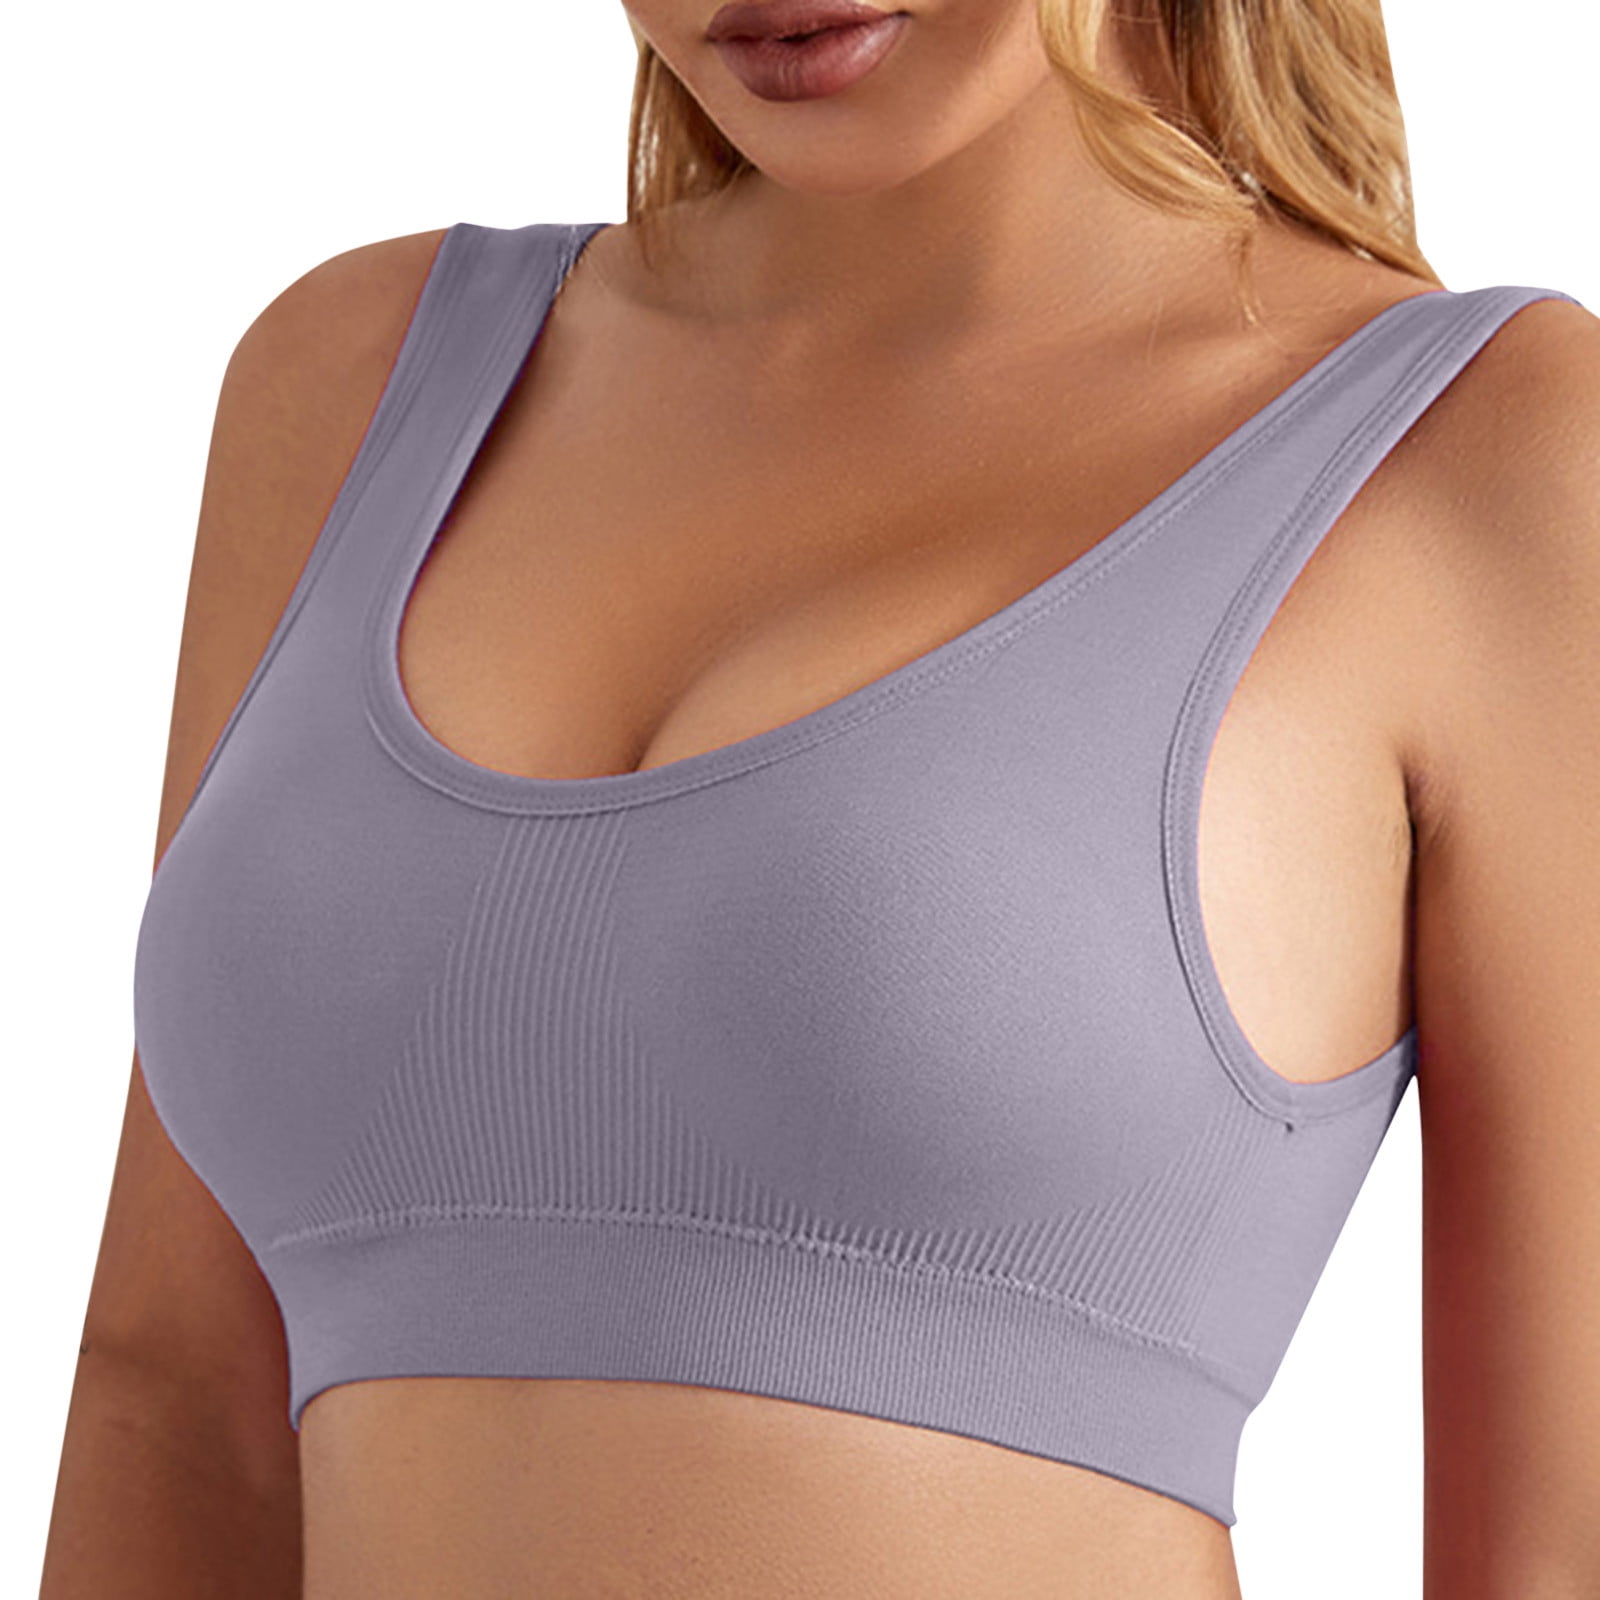 CAICJ98 Womens Lingerie High Support Sports Bras for Women, Splicing Mesh  Workout Sports Bra for Plus Size Coffee,4XL